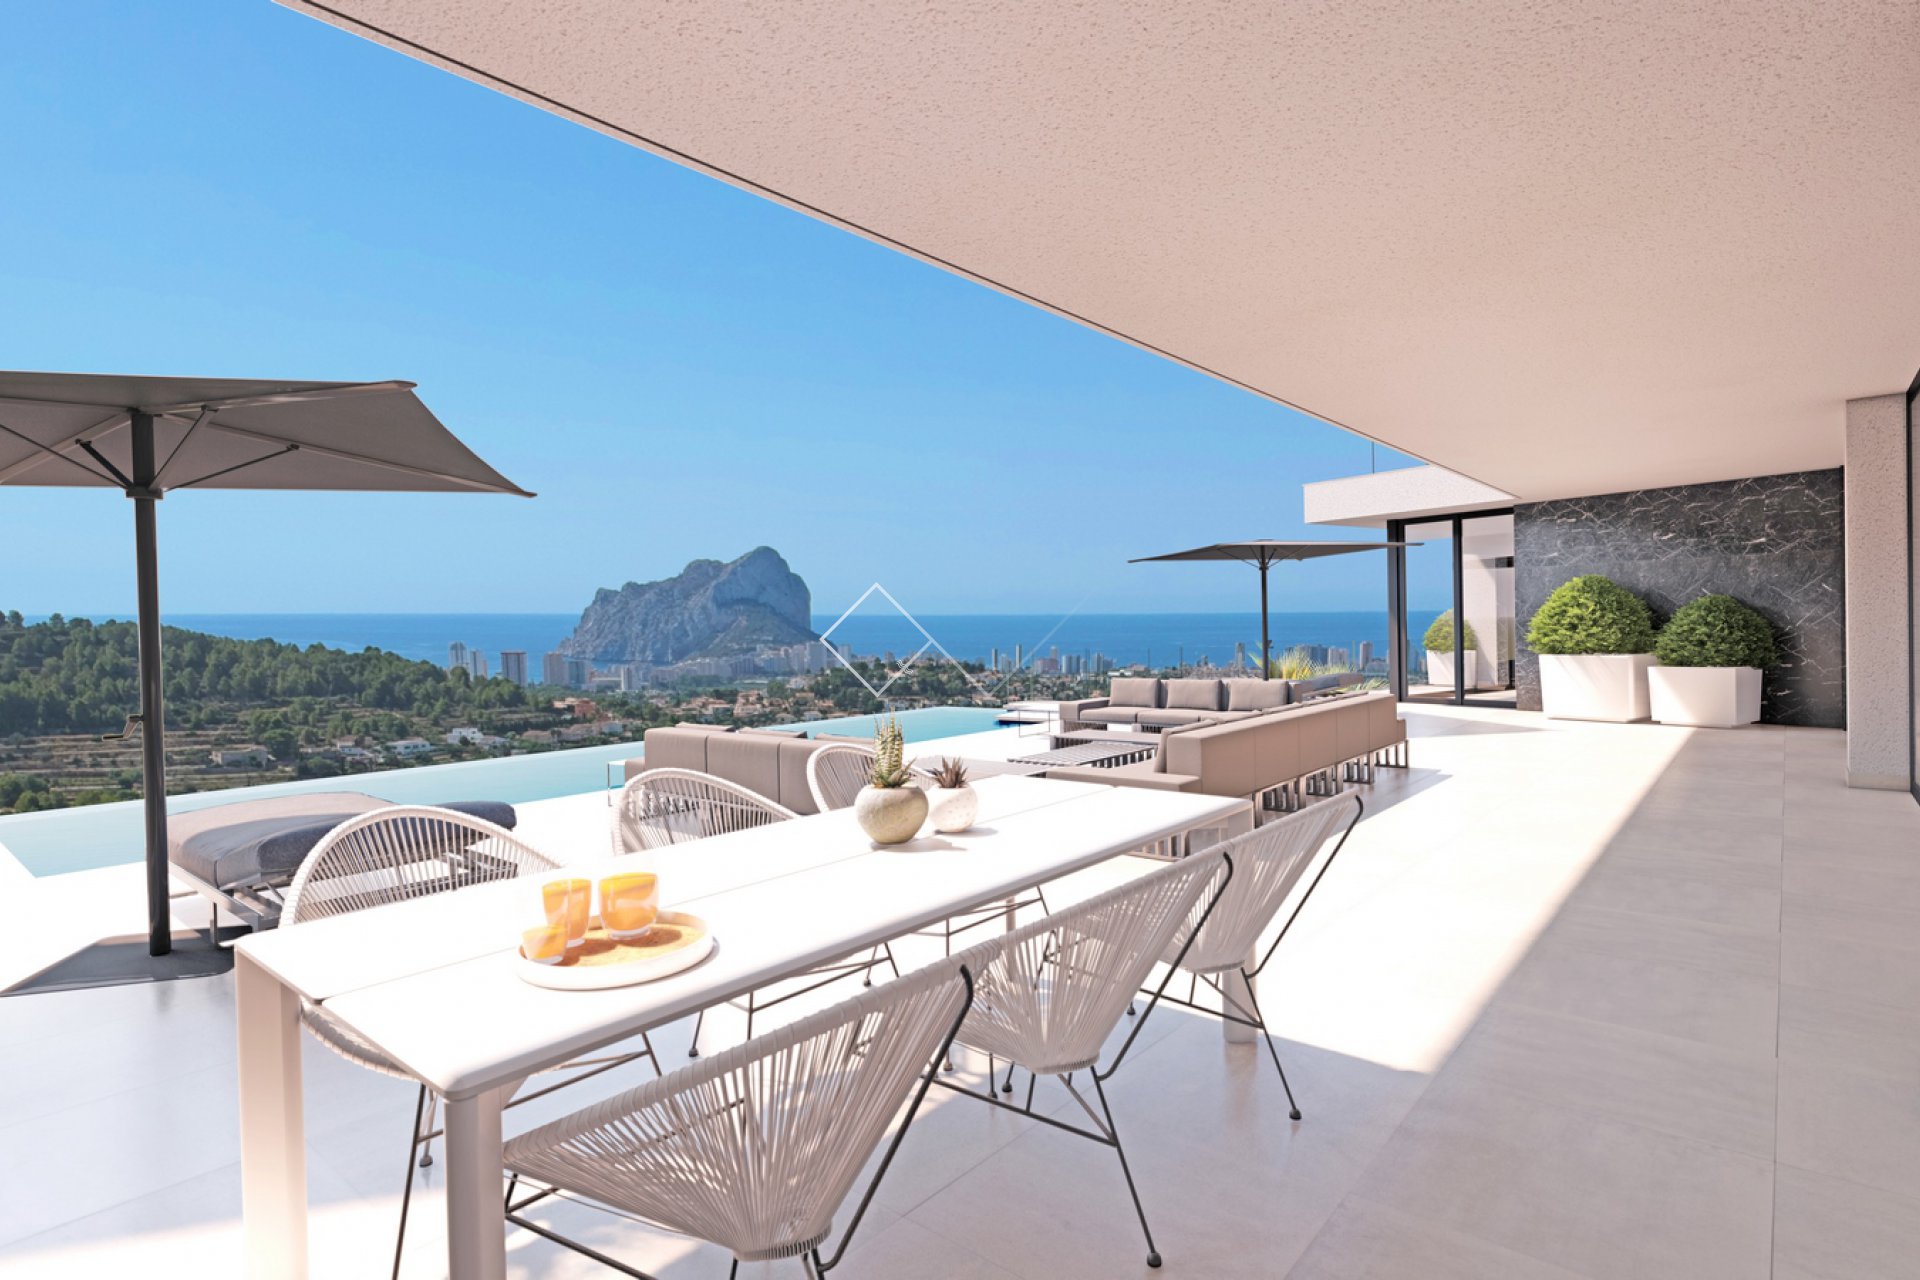 luxurious and comfortable - Ritzy villa for sale with stunning sea views in Calpe